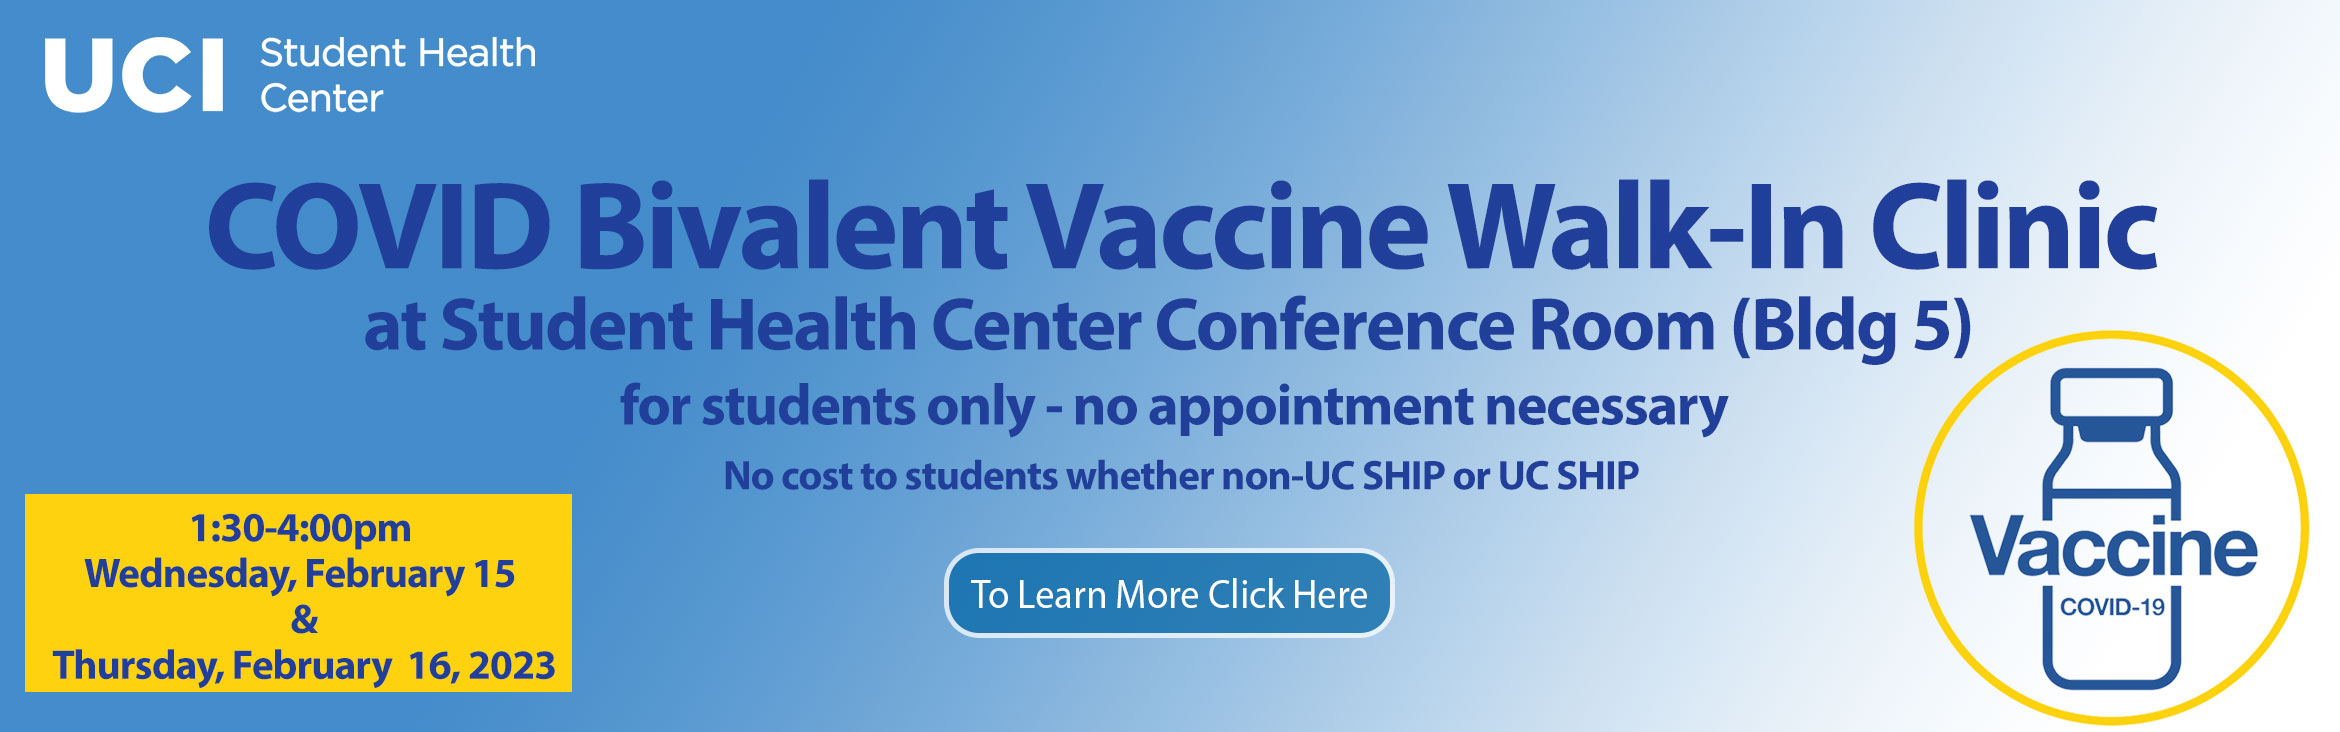 COVID Bivalent Vaccine Walk-In Clinic at the Student Health Center Conference Room (Bldg 5). No Appts necessary. February 15 and 16, 2023 from 1:30-4pm. 